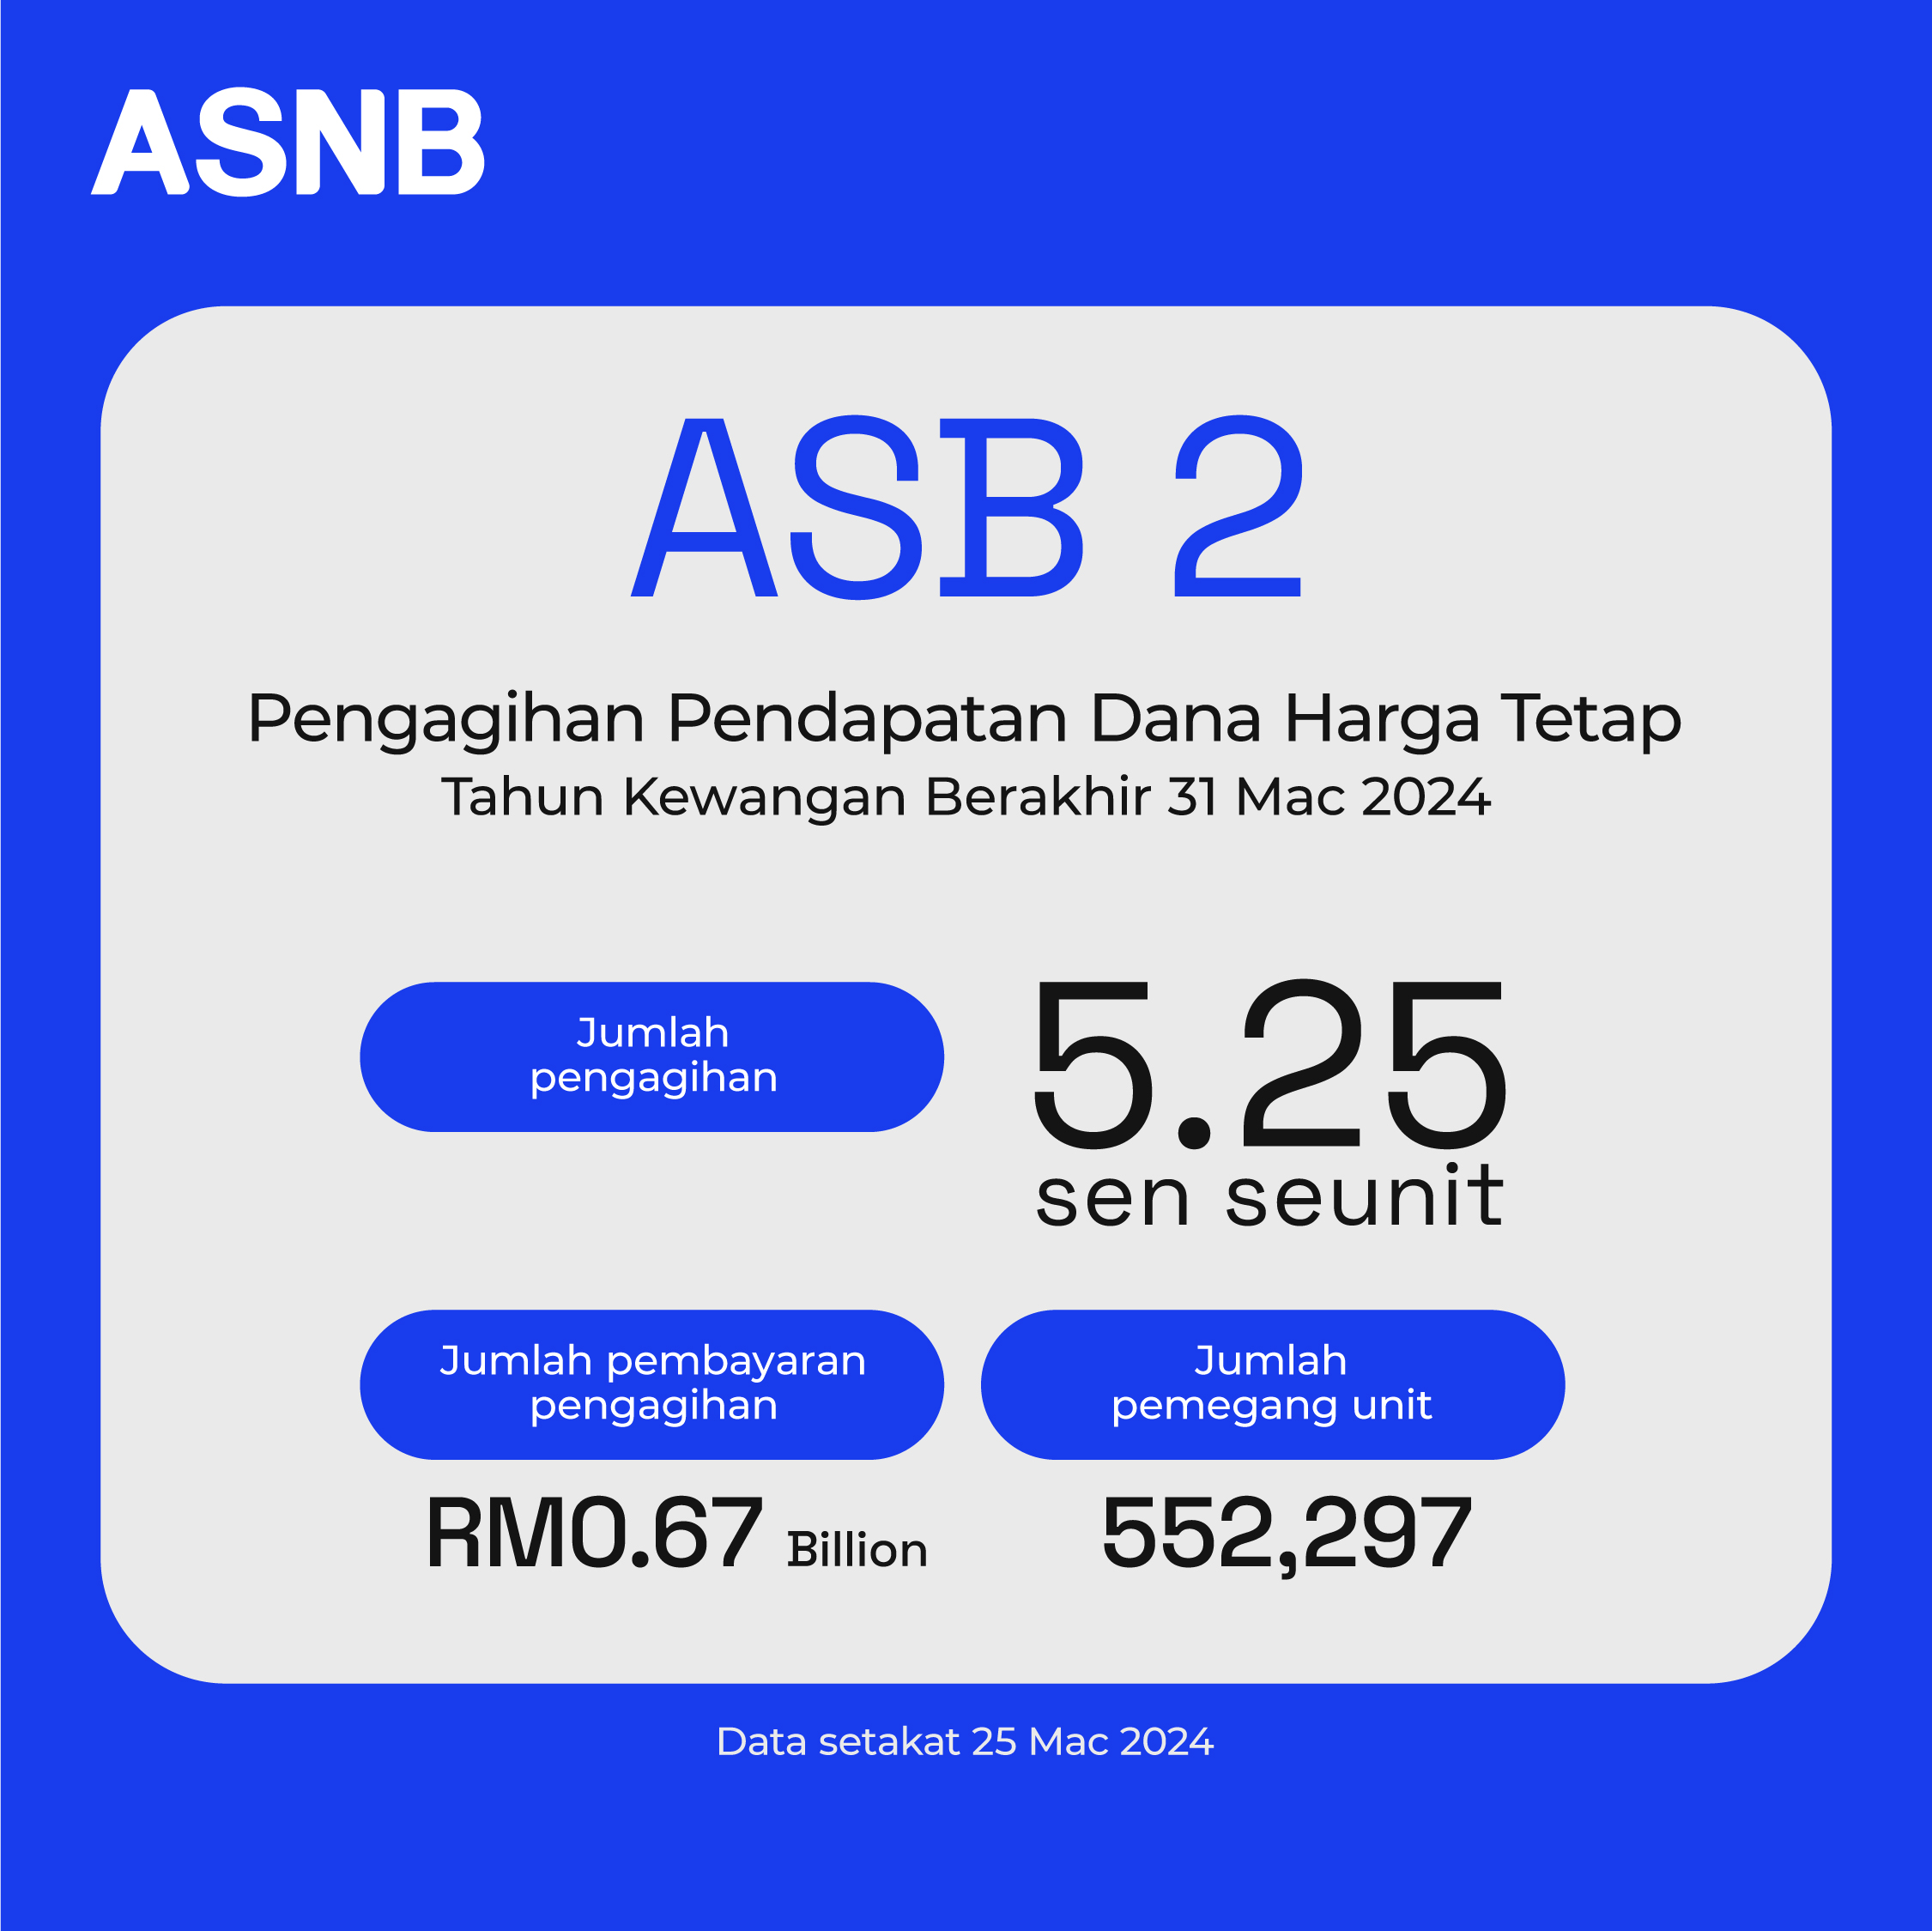 ASNB Announces RM2 Billion Income Distribution For ASB 2 And ASM Funds  | WeirdKaya